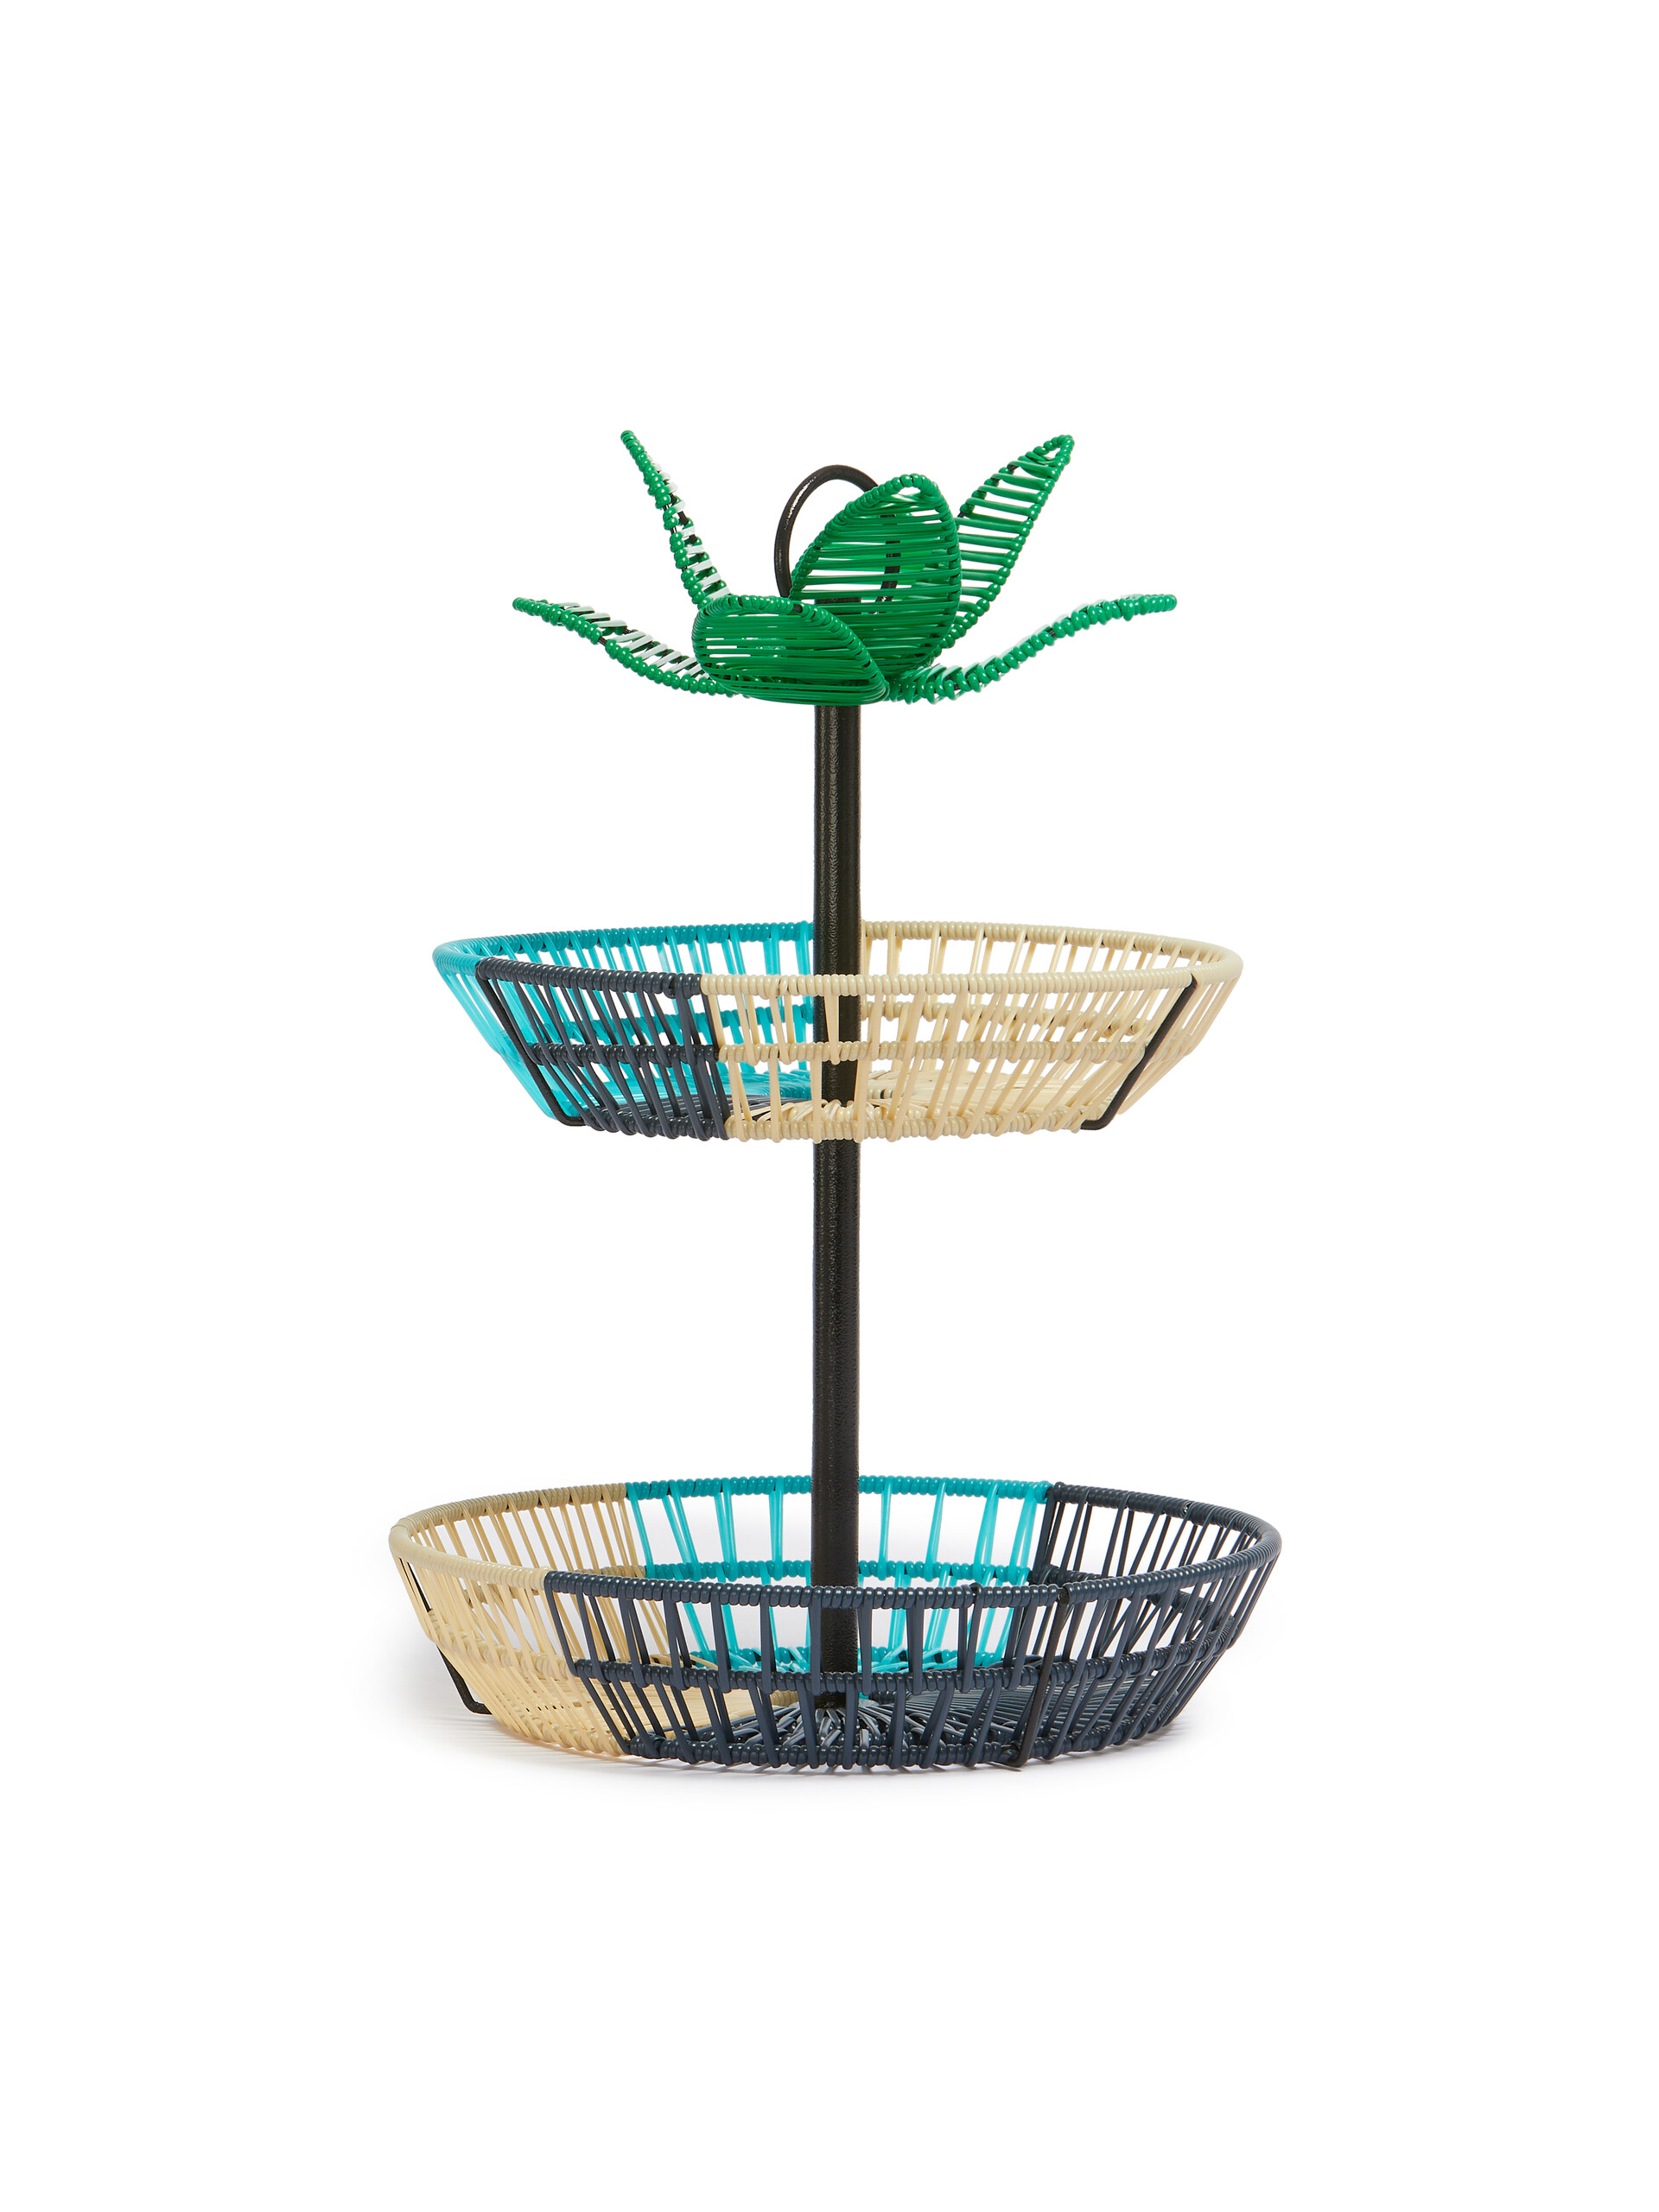 Turquoise And Beige Marni Market Two-Tier Leaf Fruit Basket - Accessories - Image 2